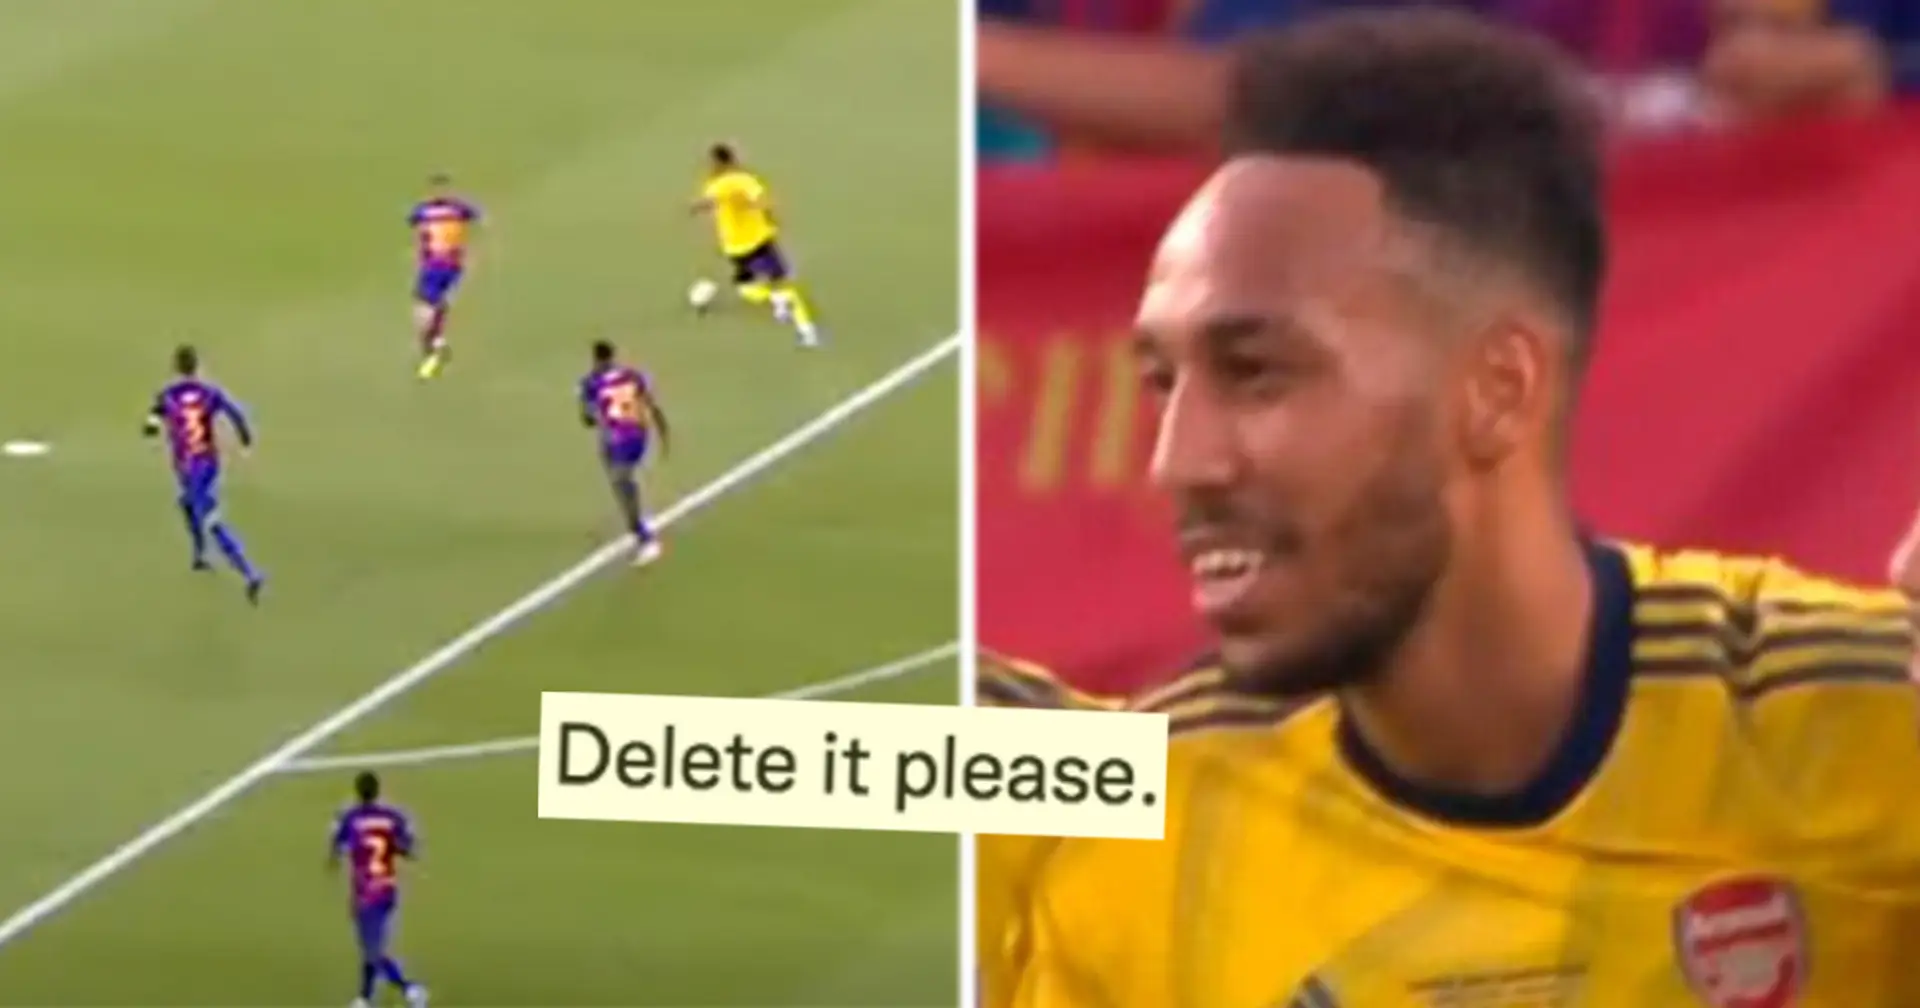 'Doing the most damage at the club': Cules slander Barca's Twitter admin for Aubameyang greeting